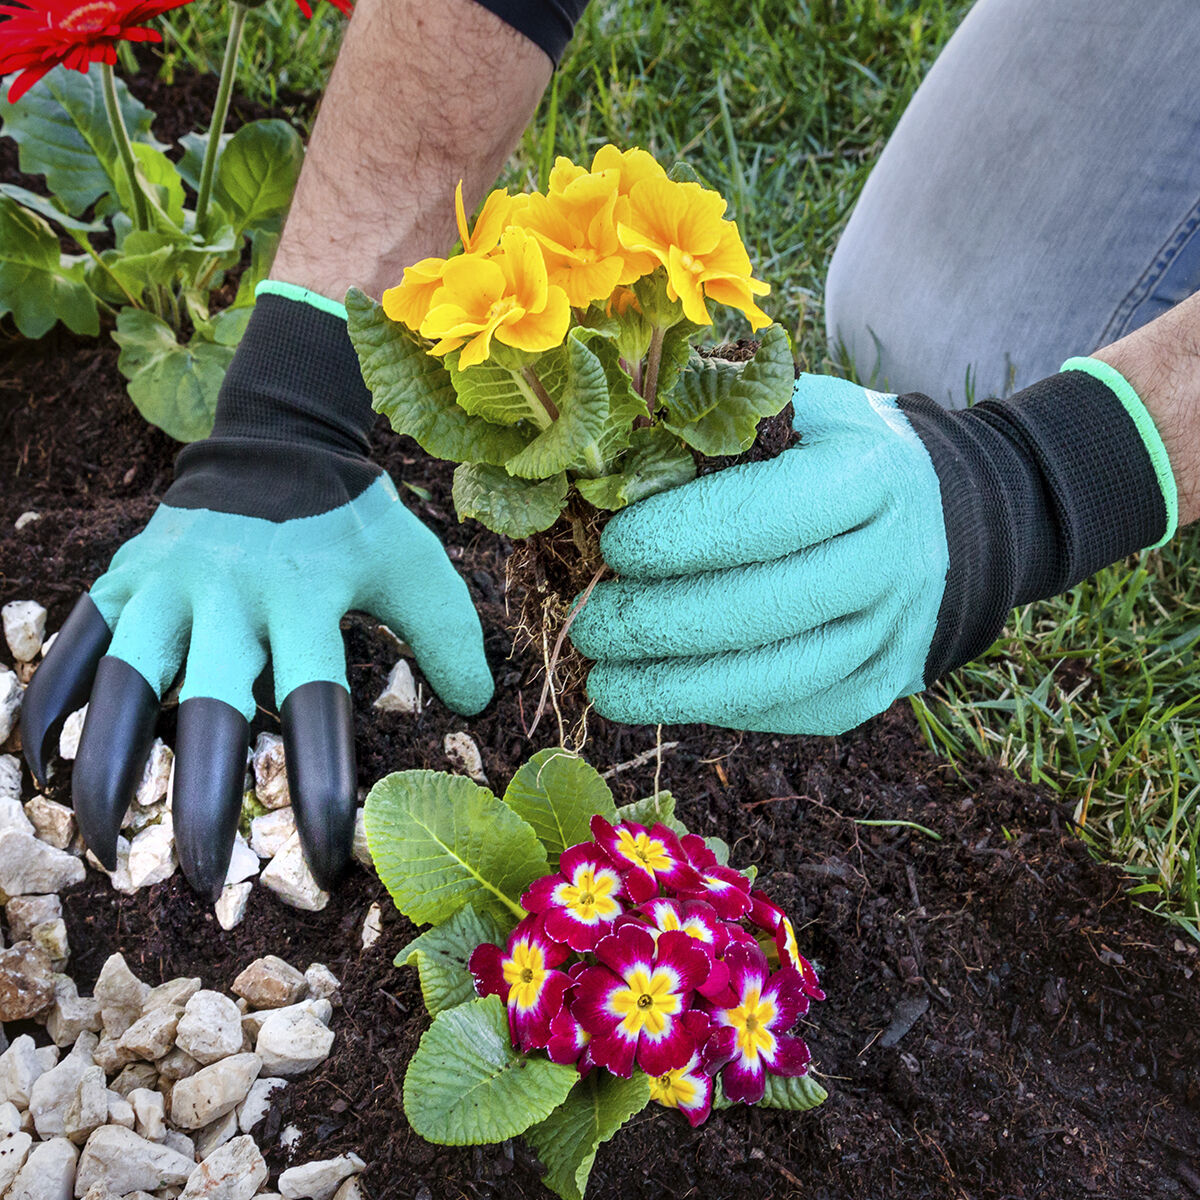 InnovaGoods Gardening Gloves with Claws